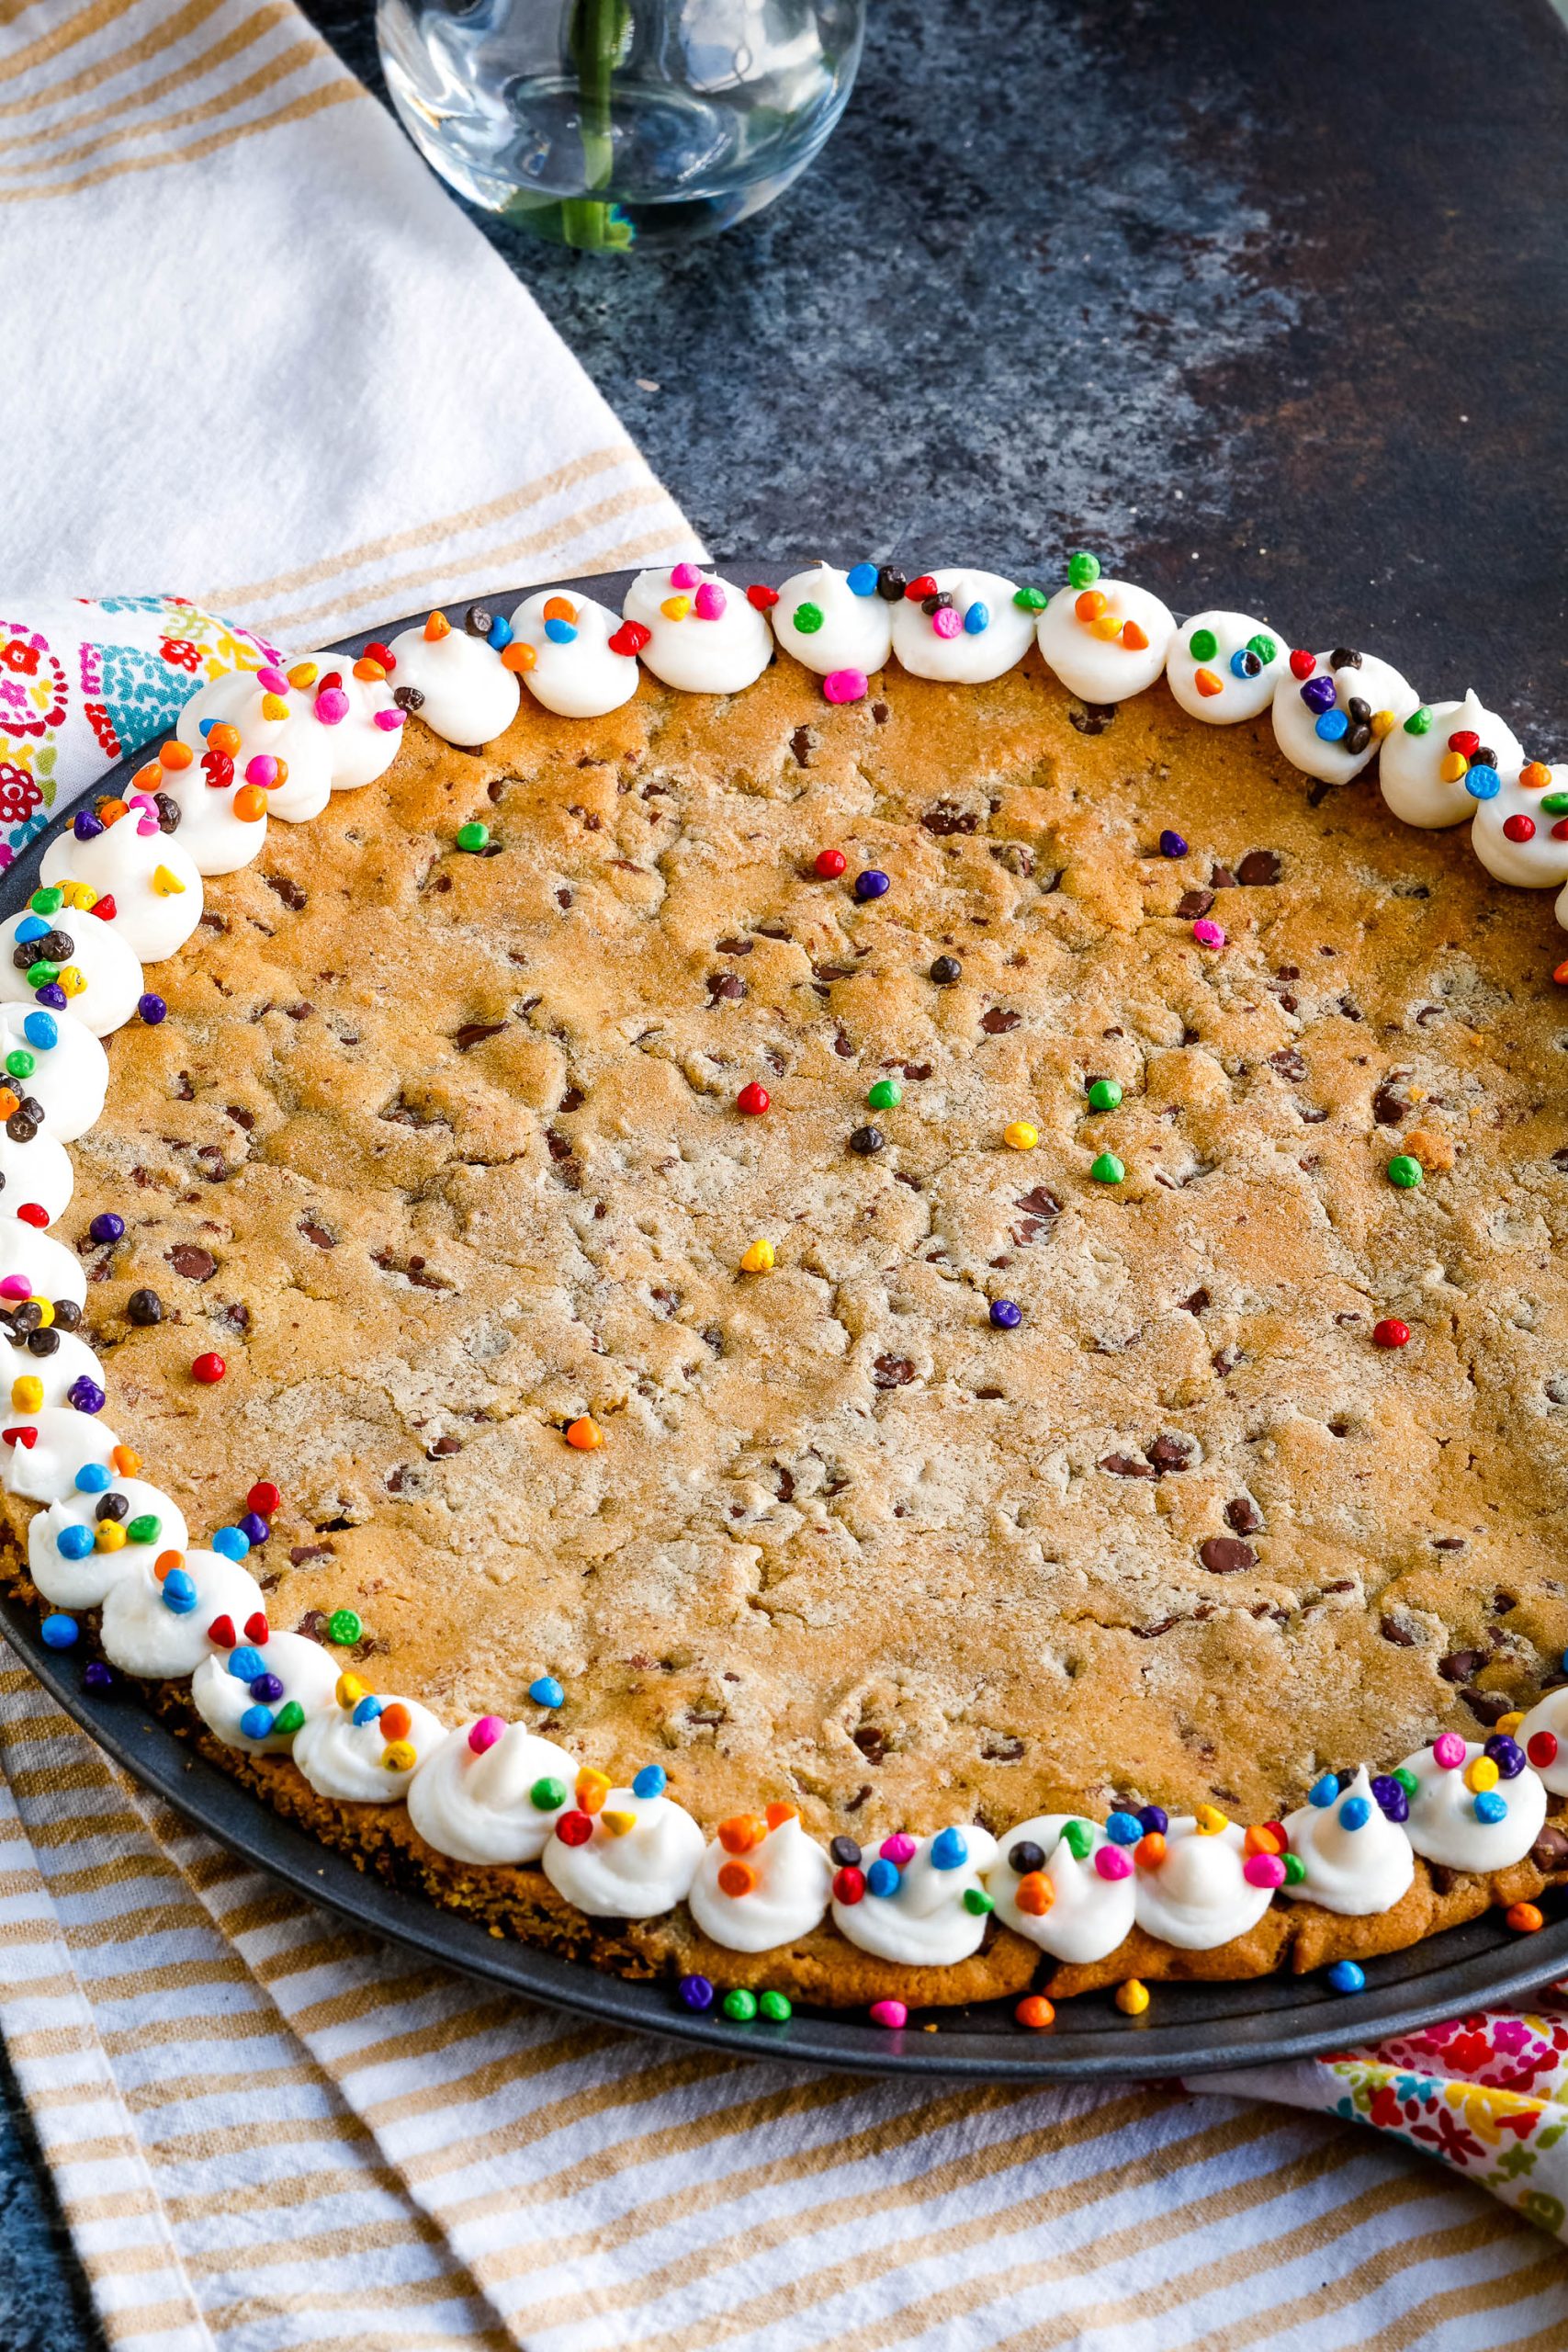 A giant chocolate chip cookie decorated around the edge.